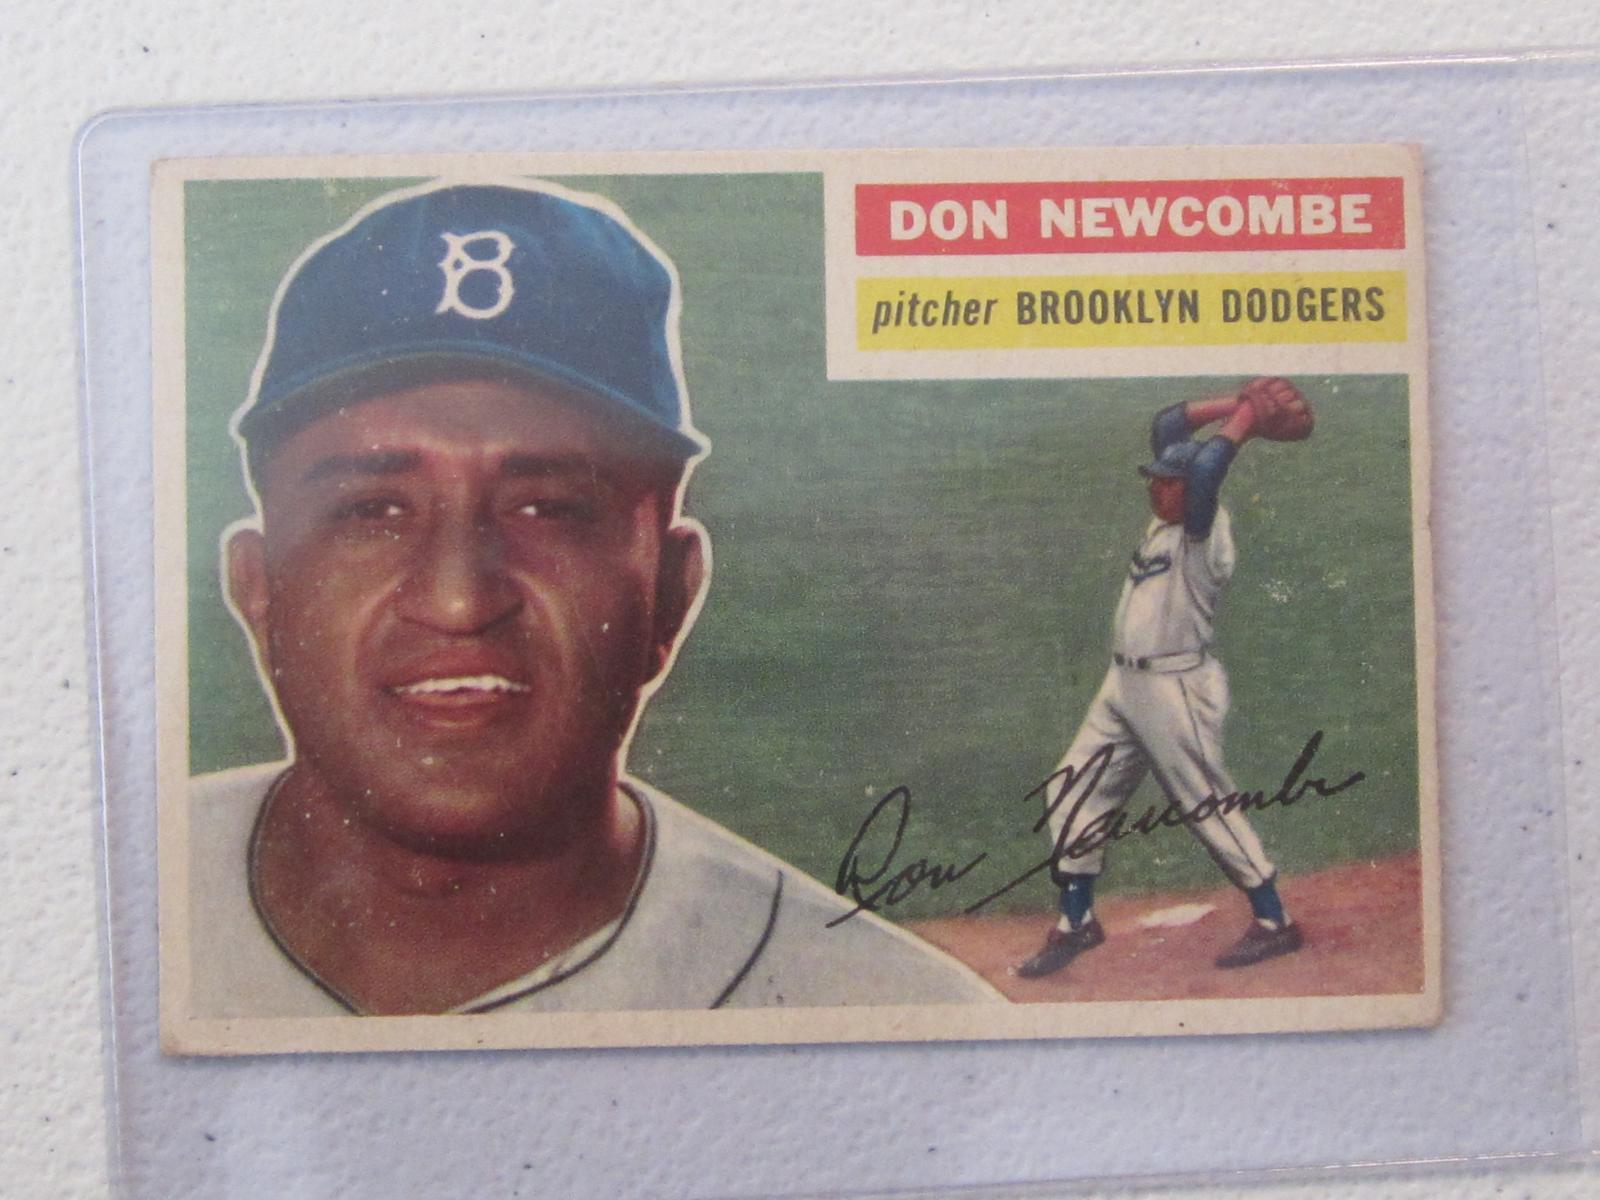 1956 TOPPS DON NEWCOMBE NO.235 VINTAGE